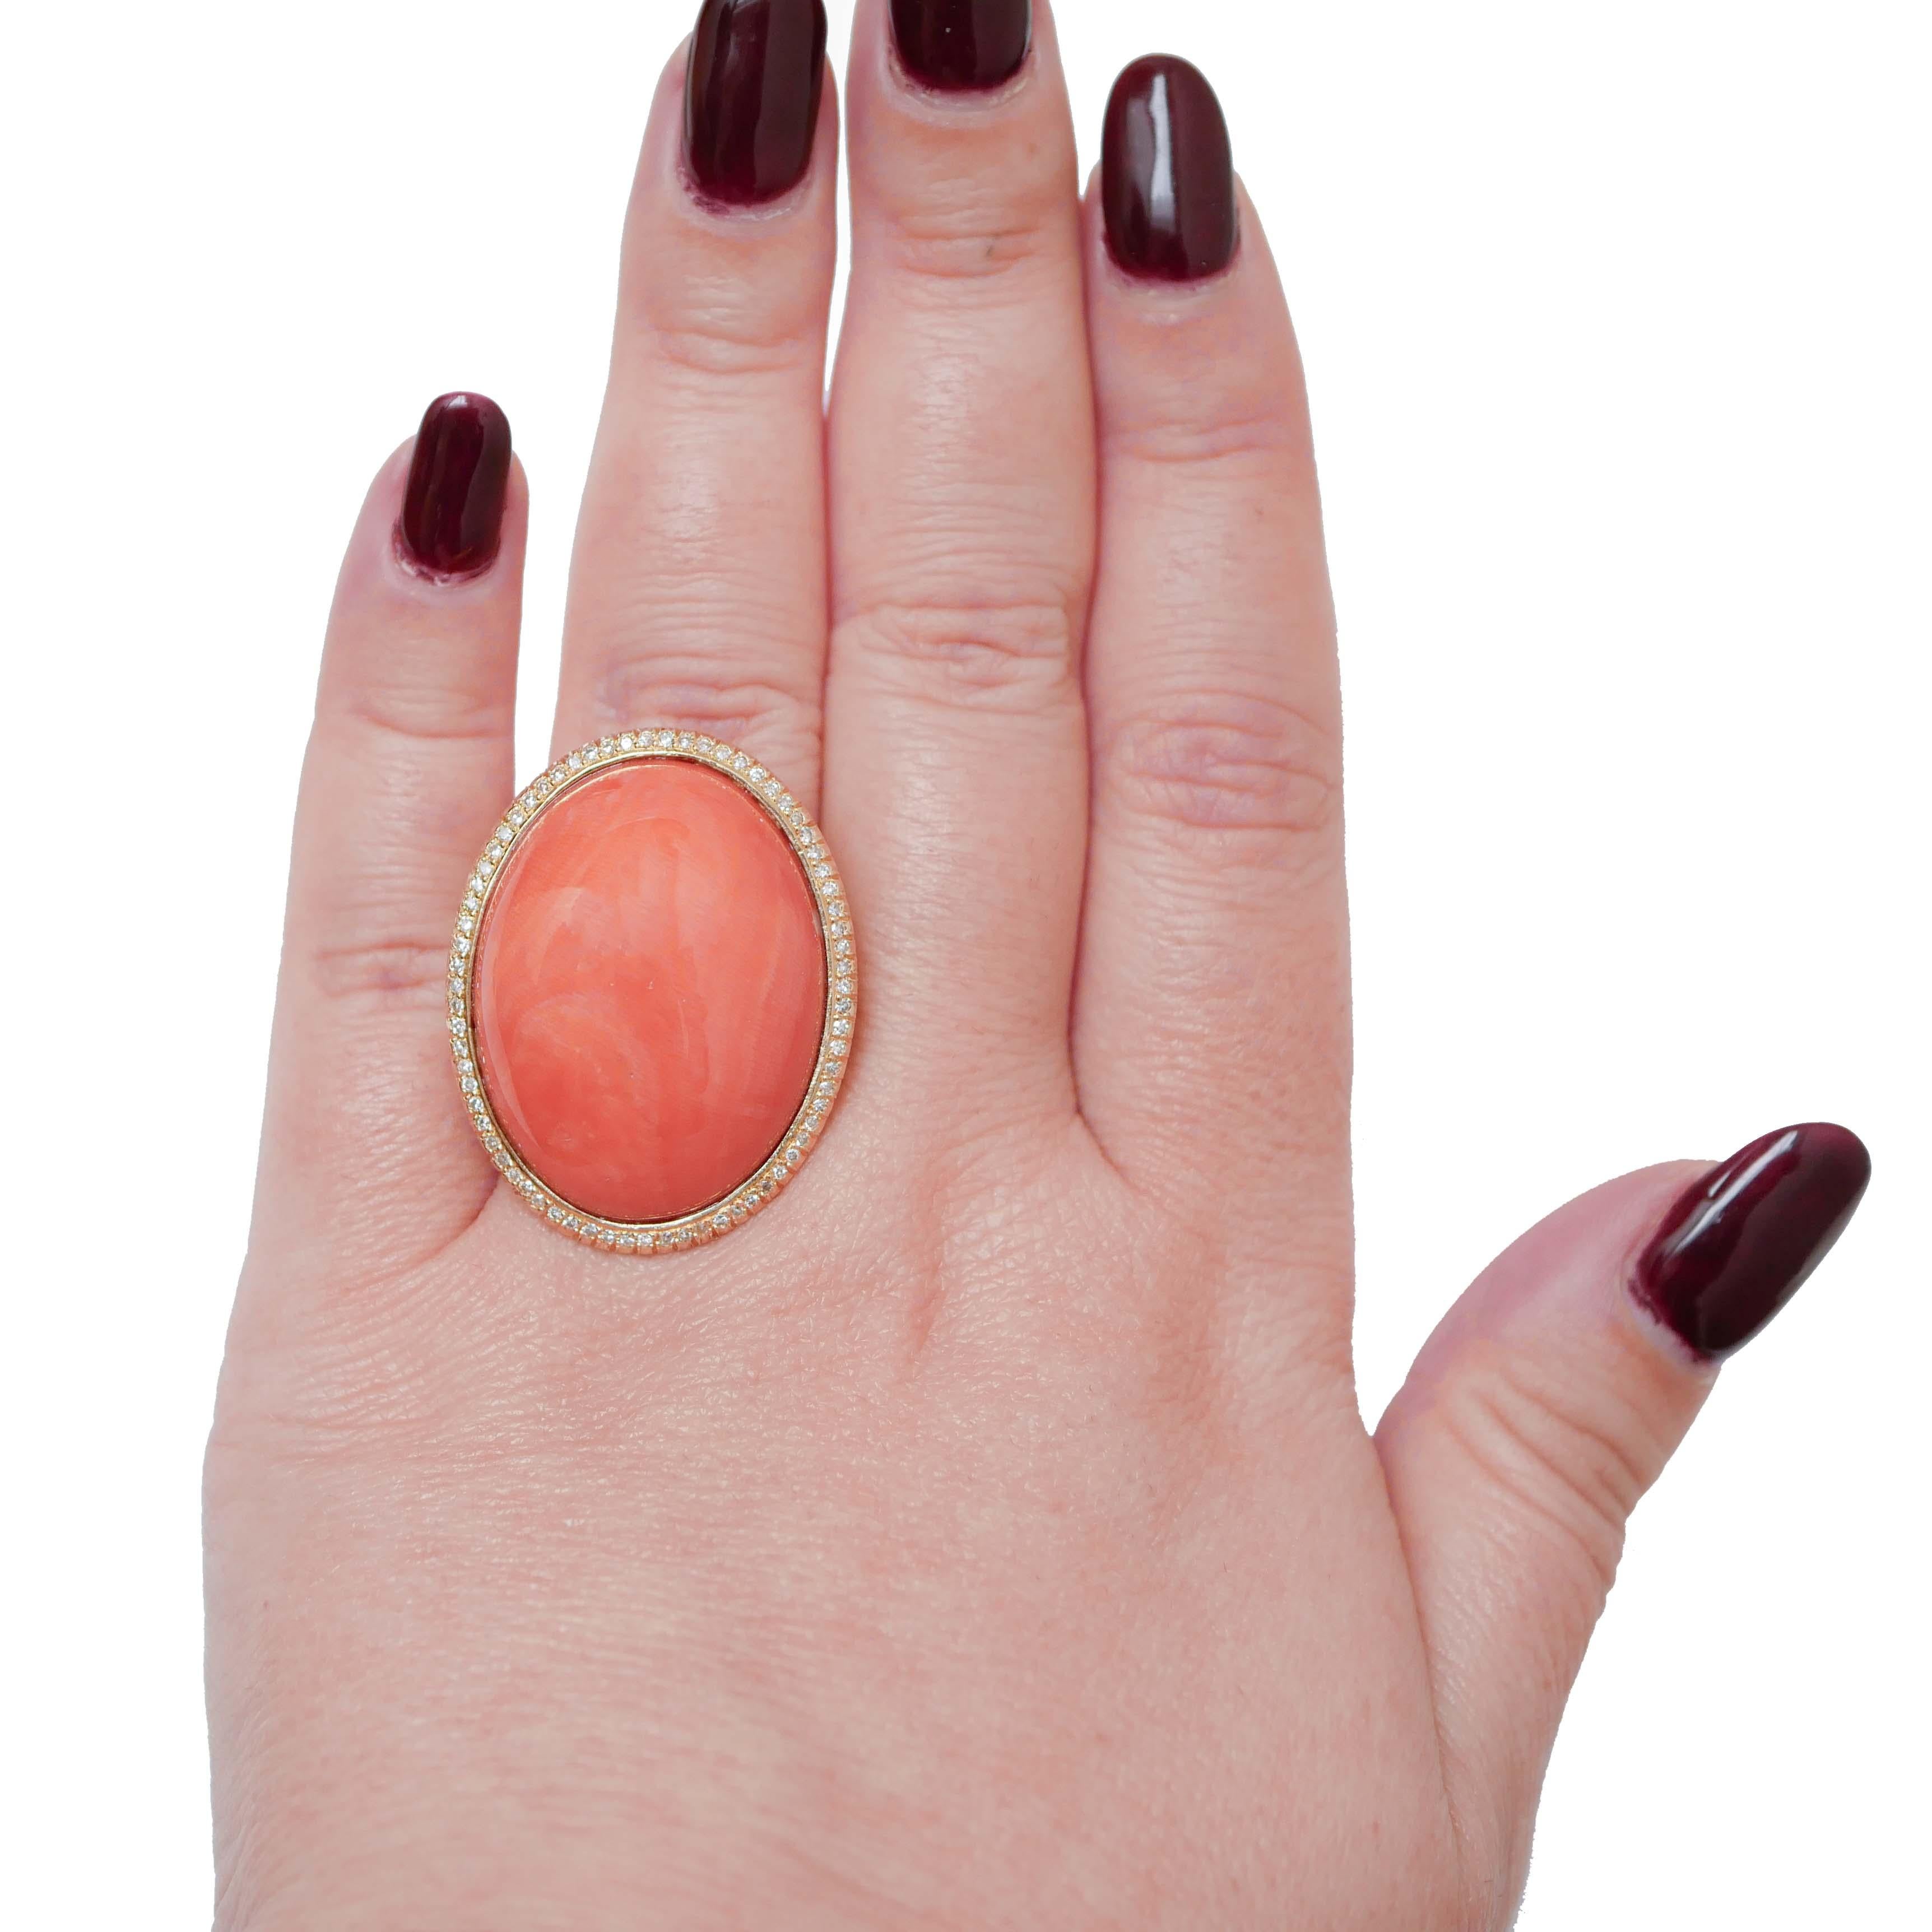 Mixed Cut Coral, Diamonds, 18 Karat Yellow Gold Ring. For Sale